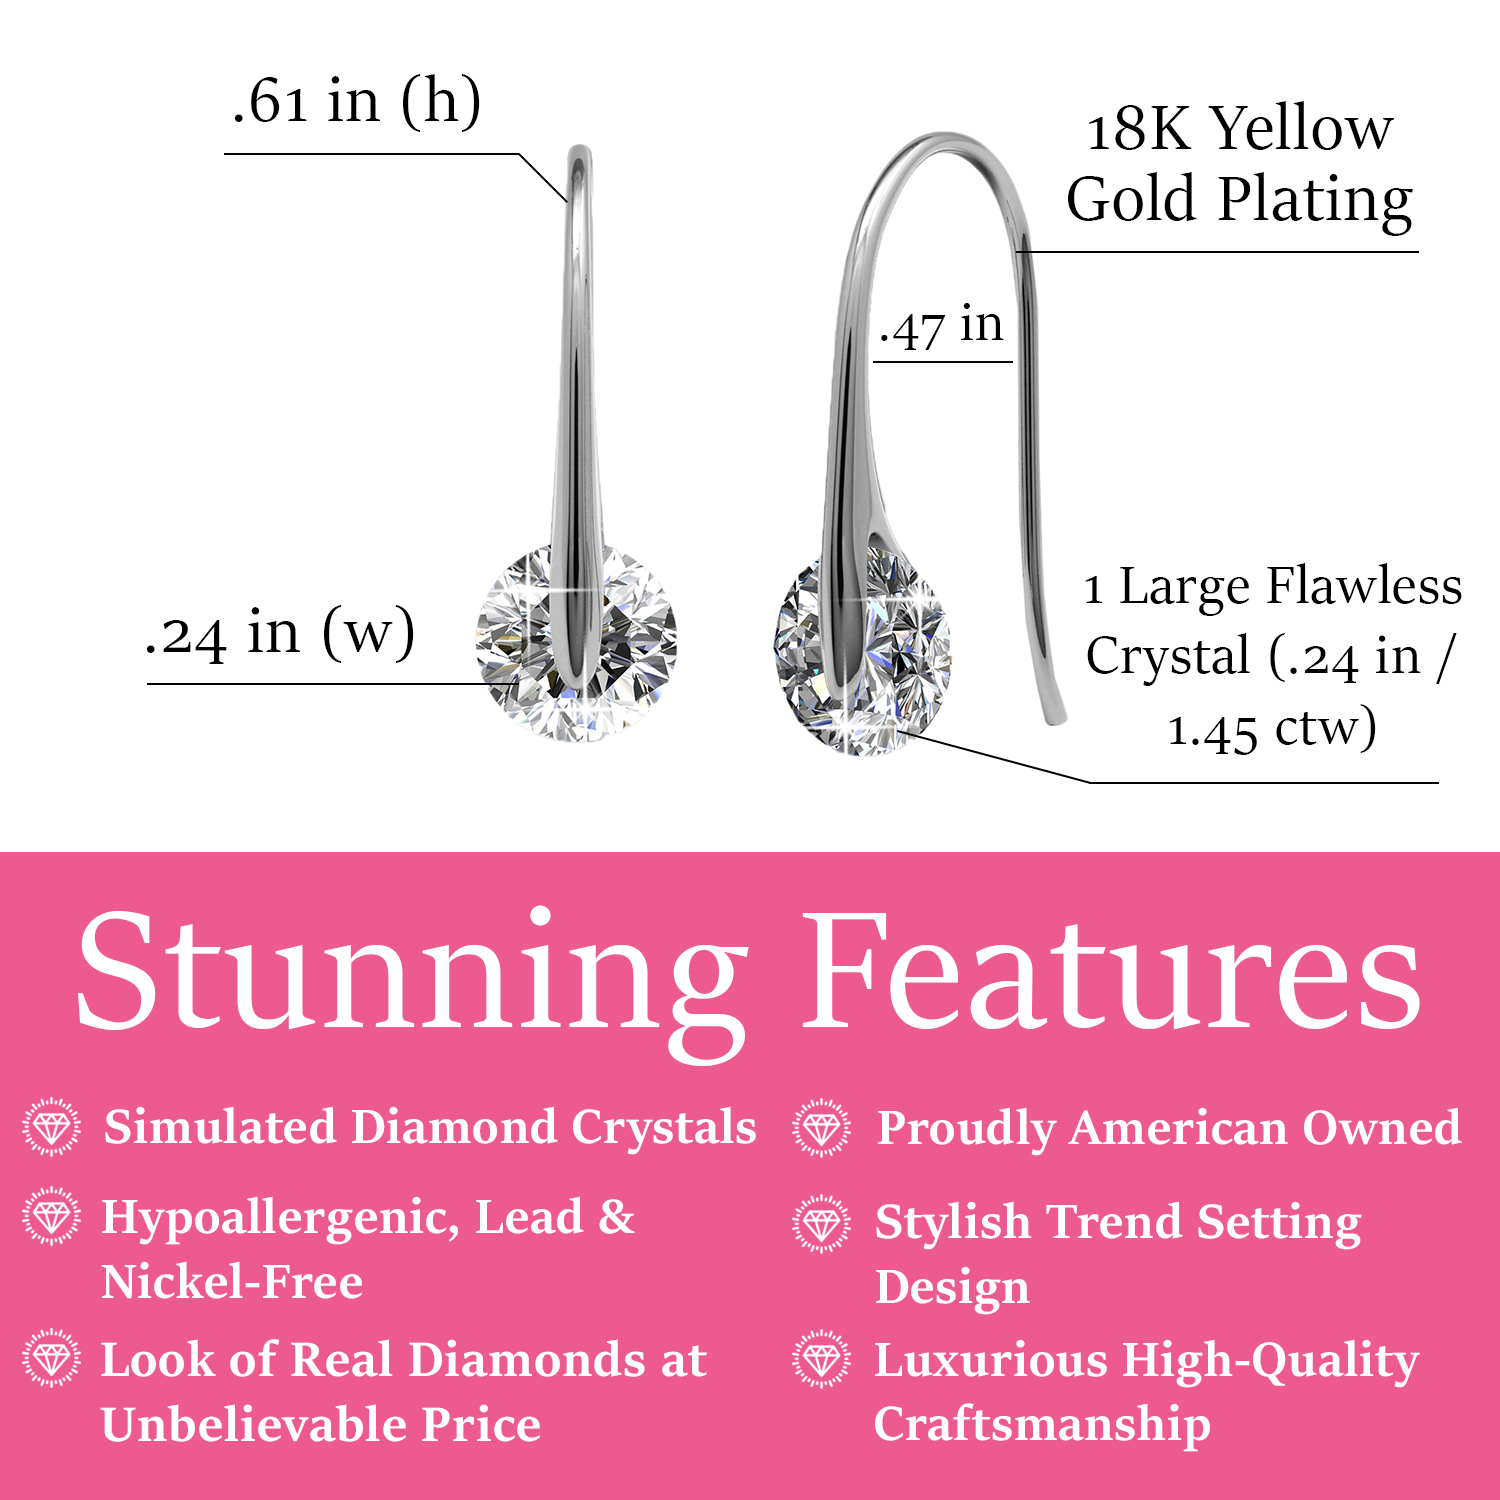 Cate & Chloe McKayla 18k White Gold Plated Silver Drop Earrings | Women's Crystal Earrings, Gifts for Her - image 2 of 8